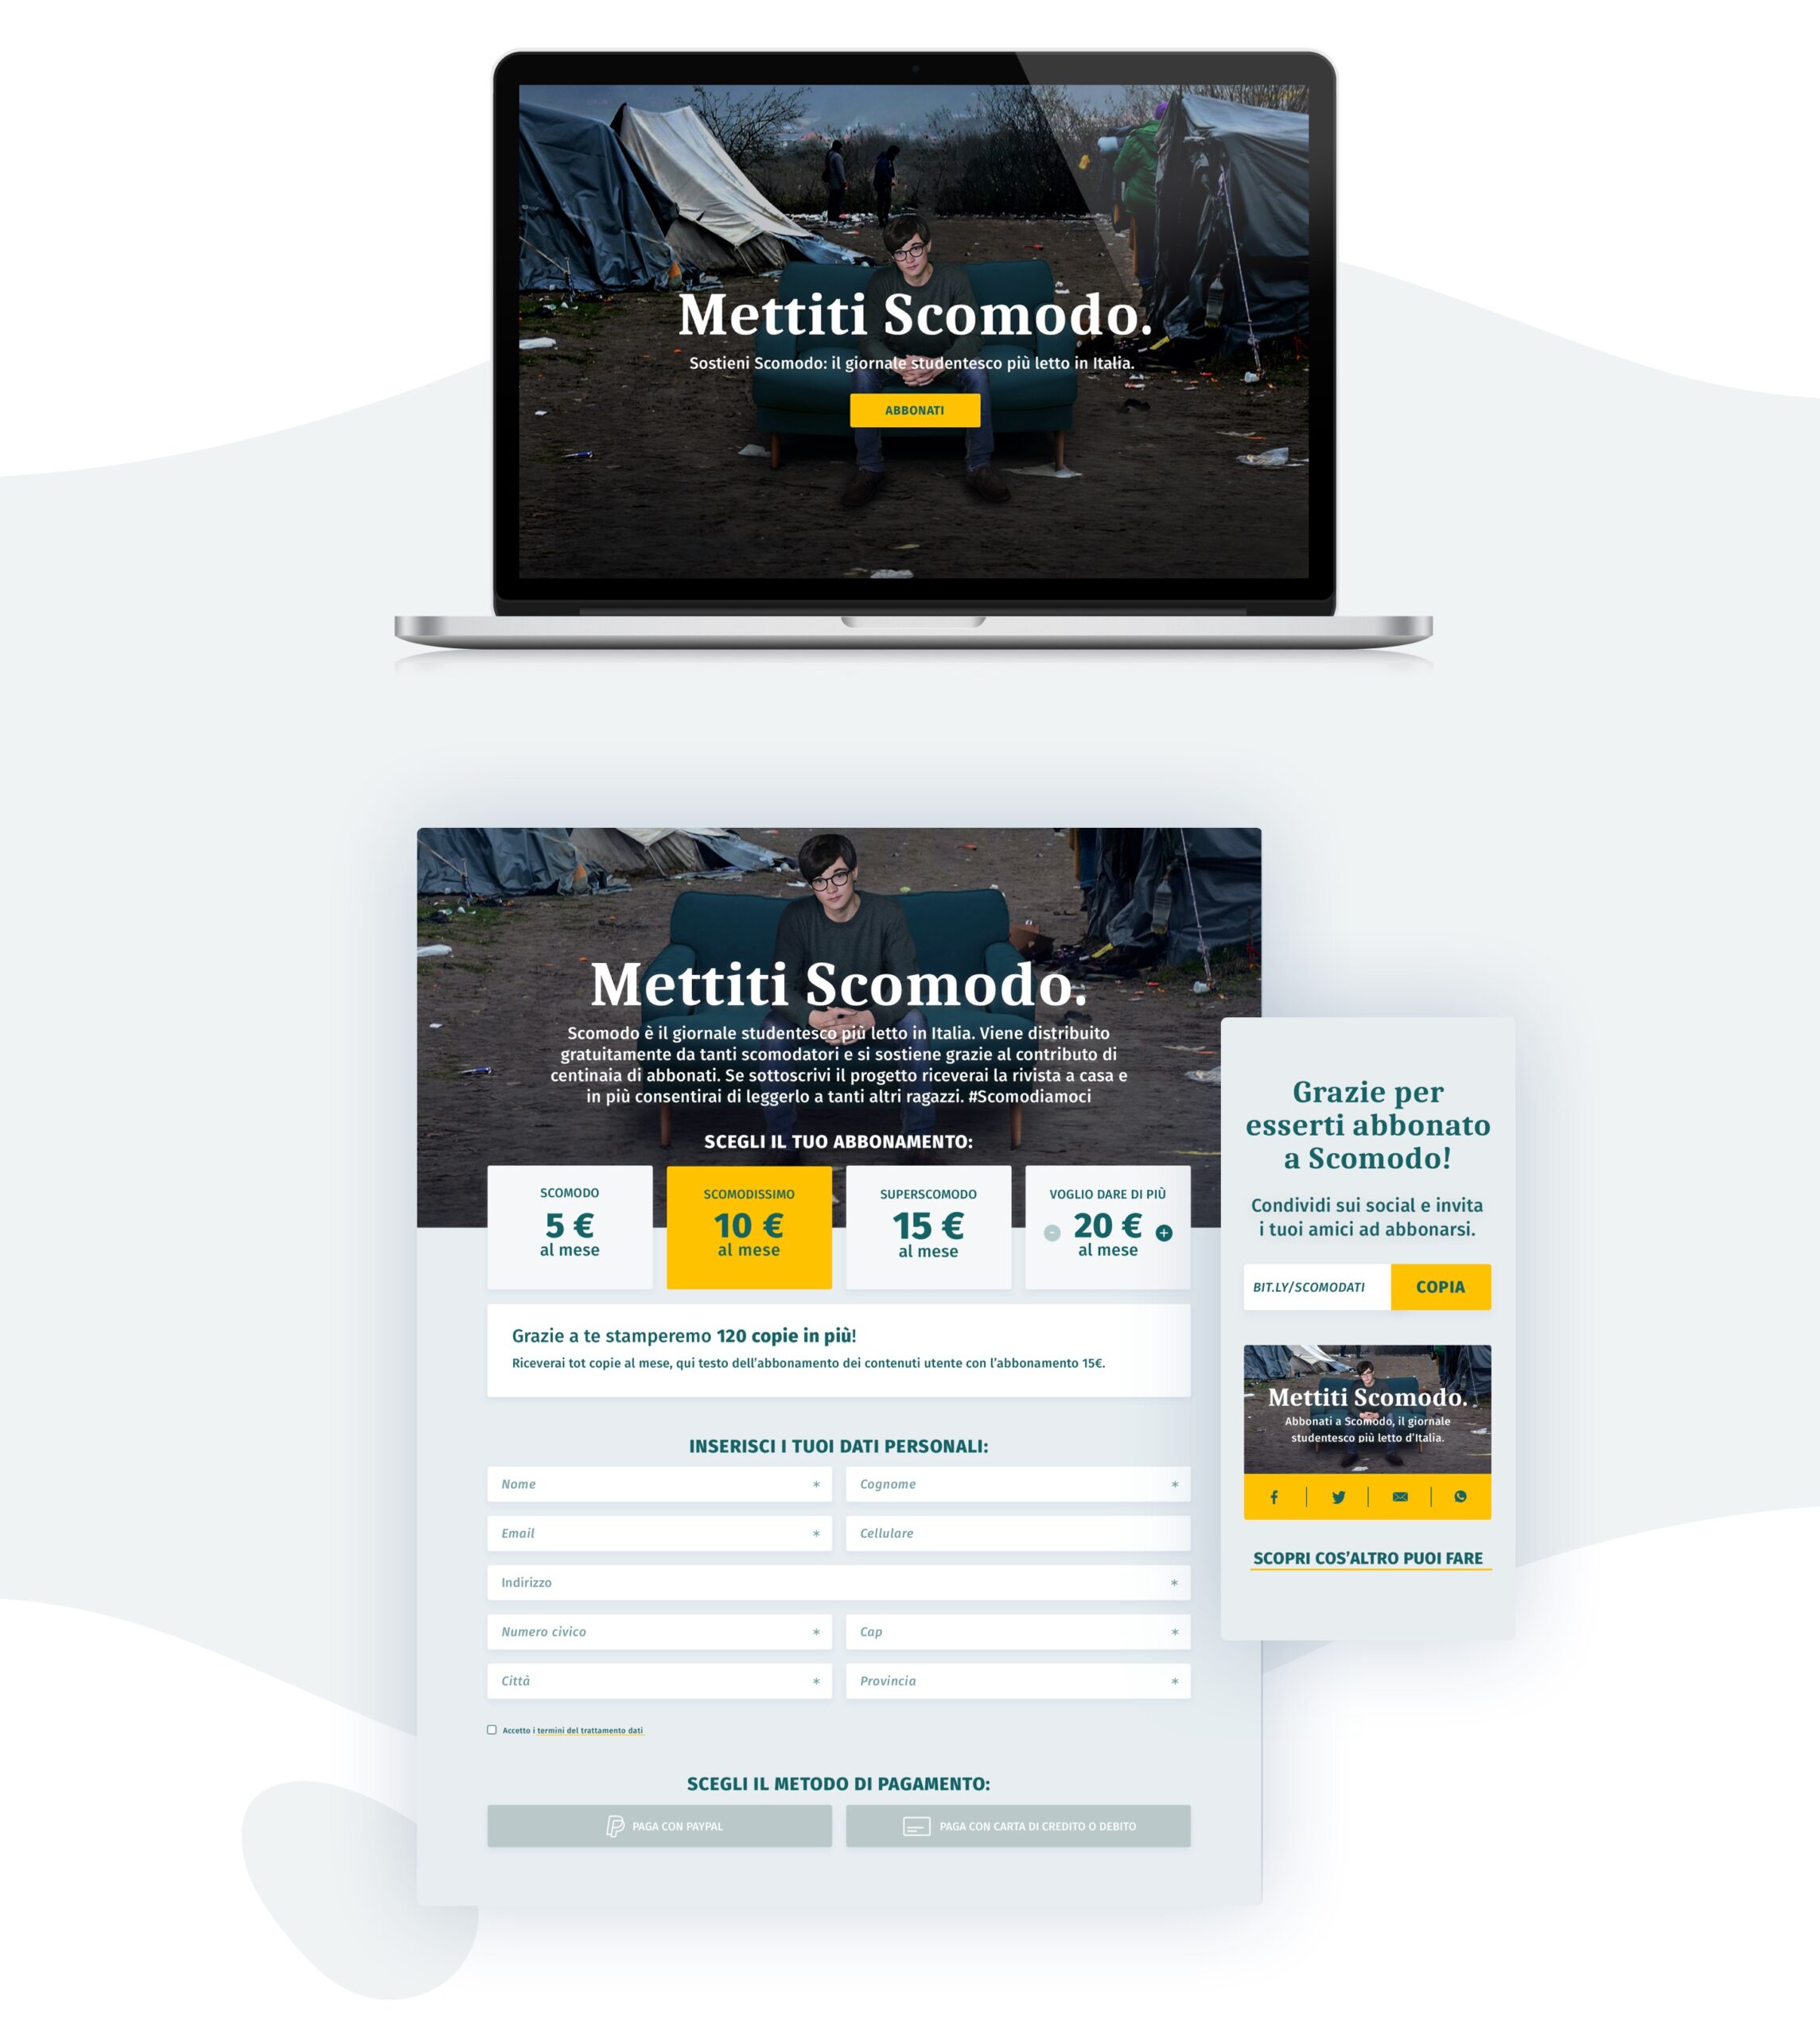 mockup of landing page and subscription form of scomodo campaign